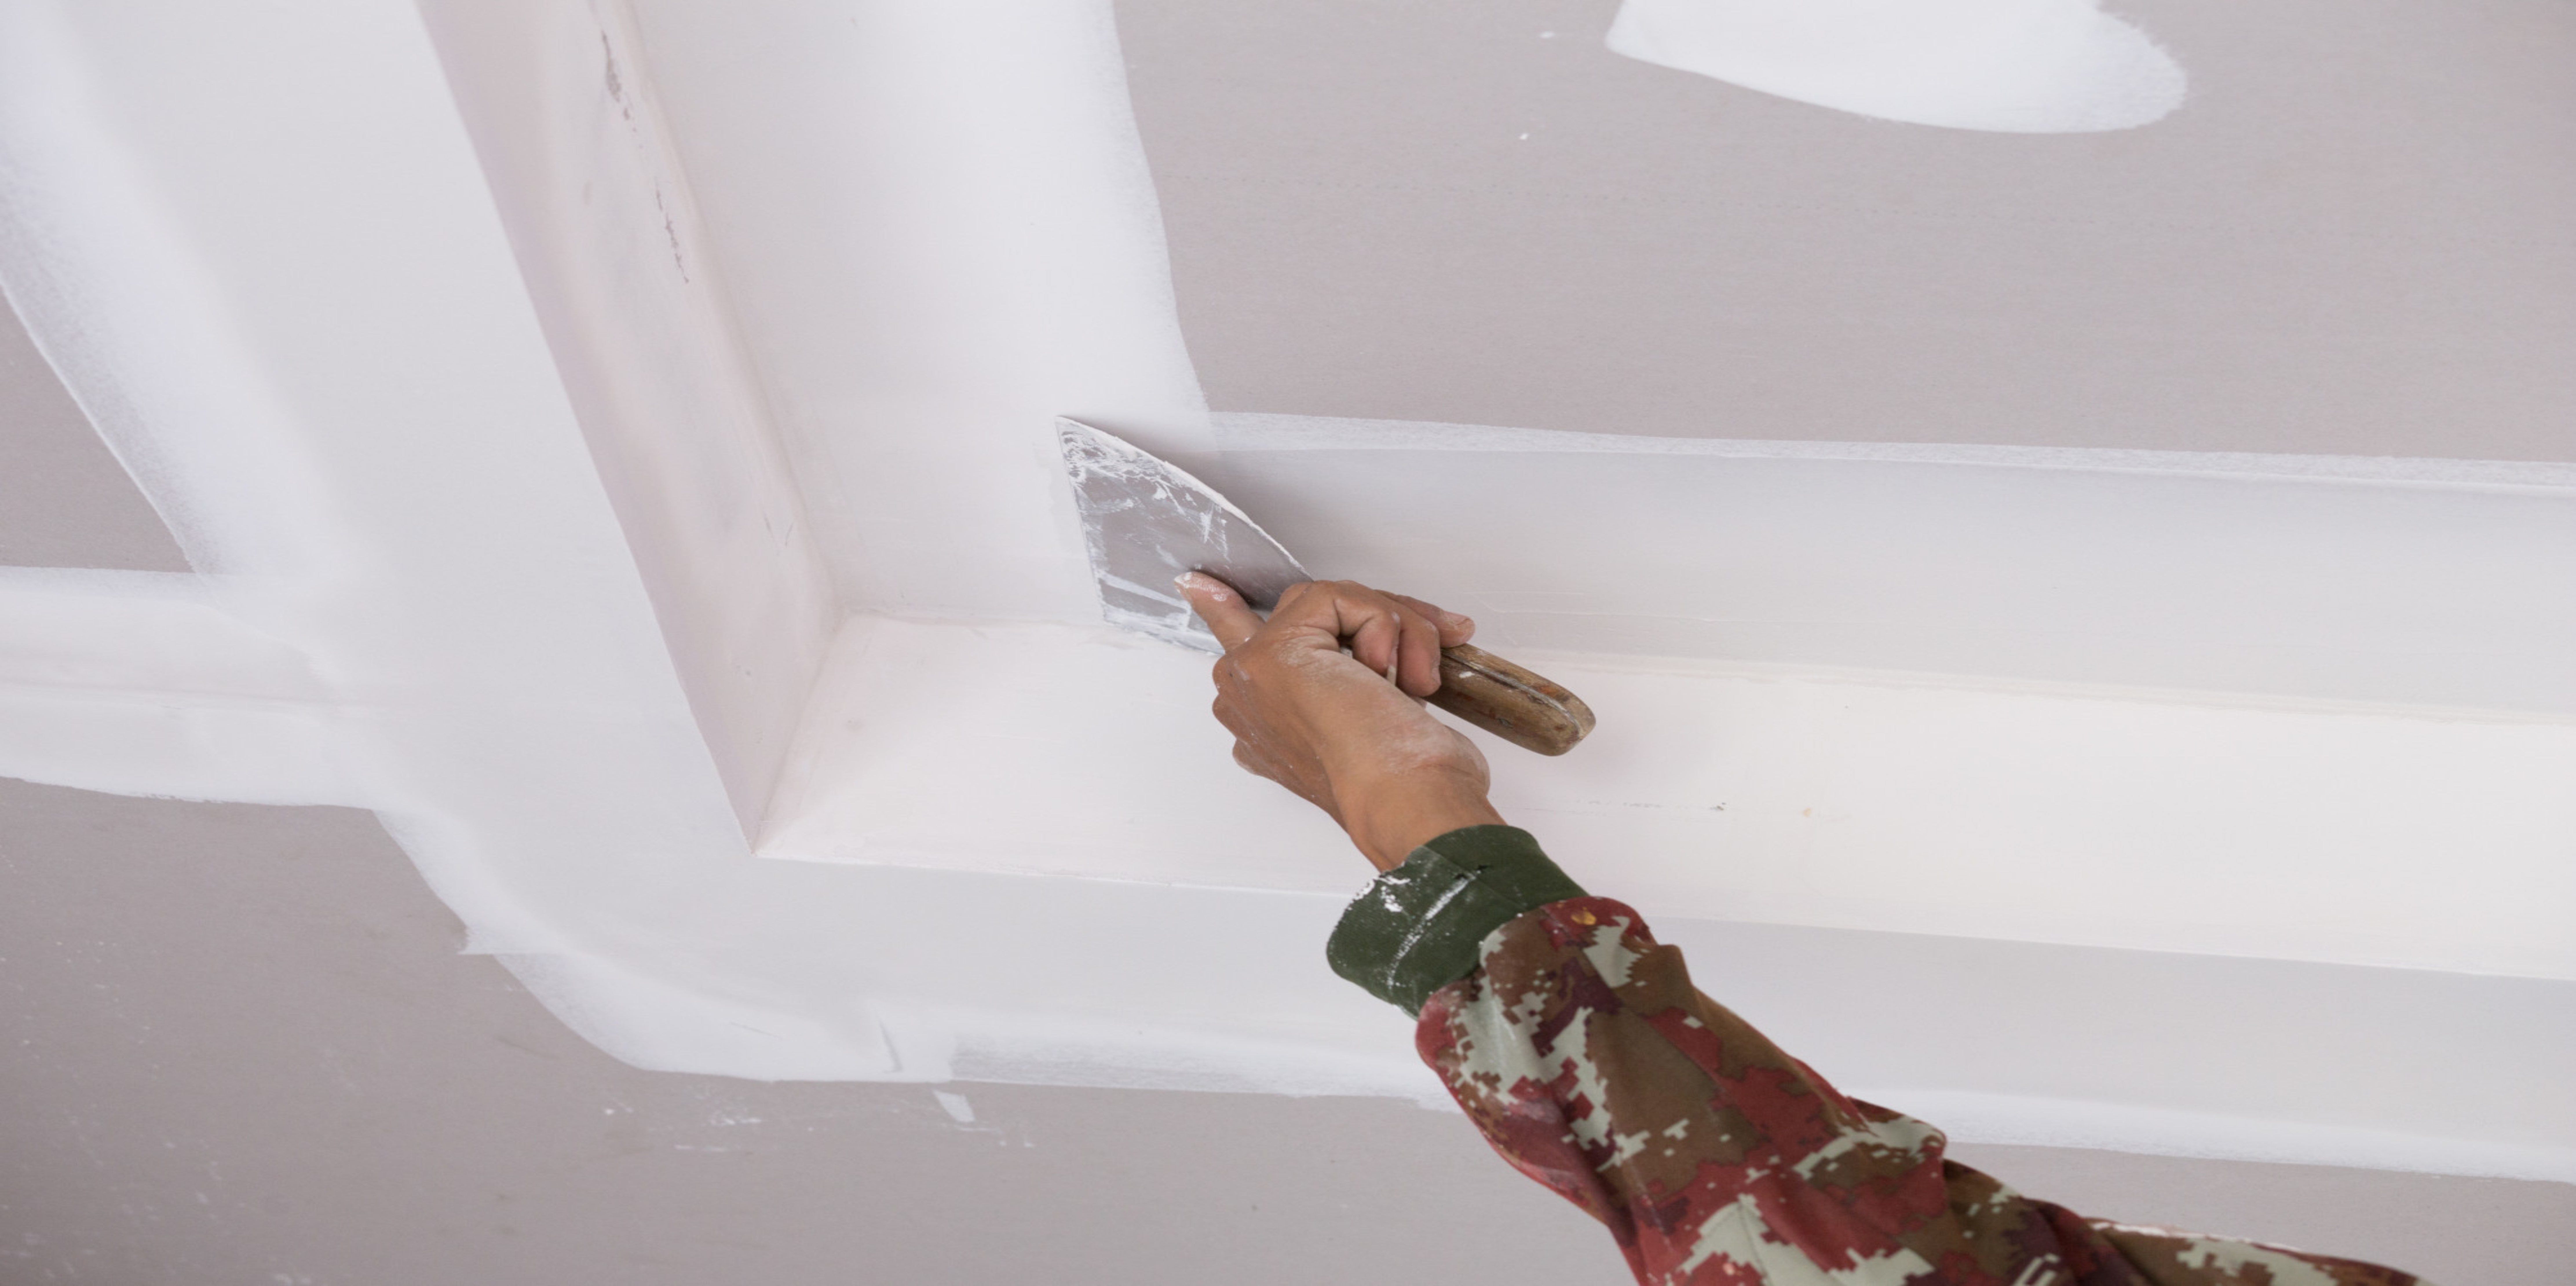 Brilliant Solutions for Repairing Walls and Ceilings  How to patch drywall,  Diy home improvement, Home repairs